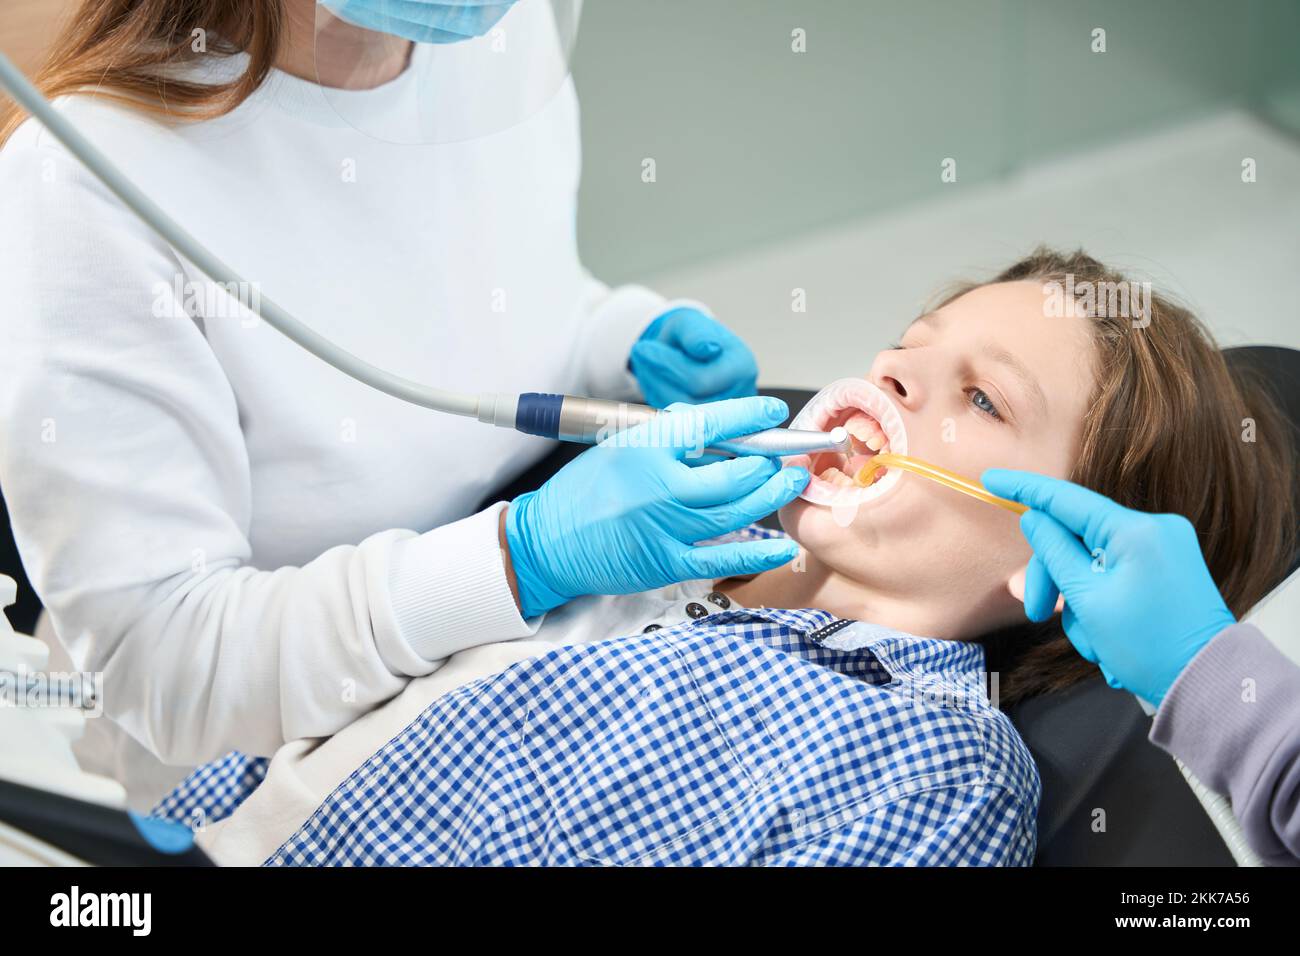 Young patient treats tooth at a dentist in medical institution Stock Photo